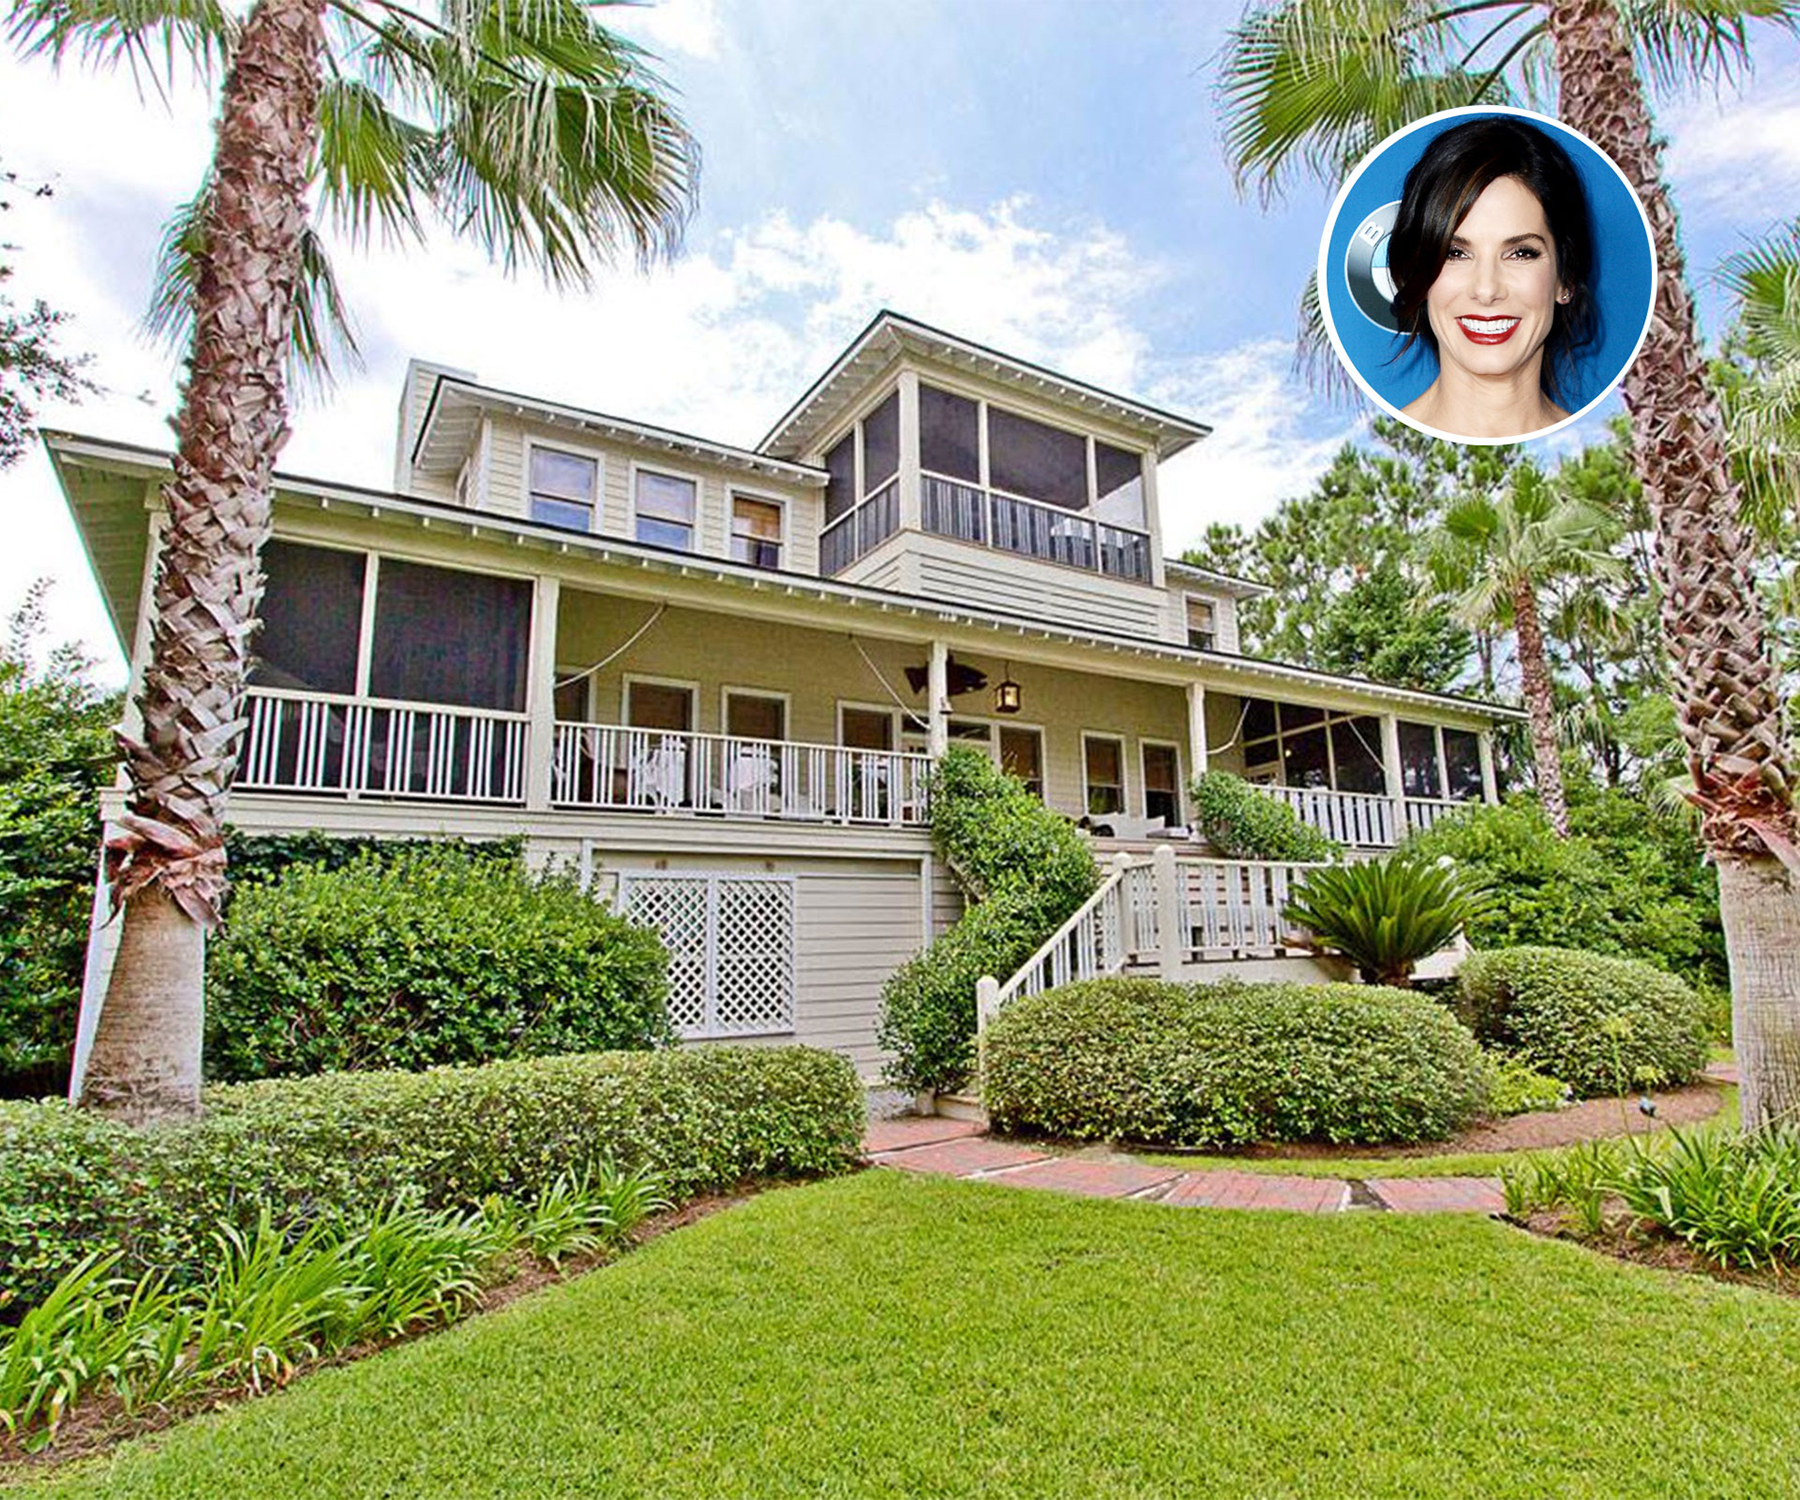 You can rent Sandra Bullock’s luxury holiday home for just $2,000 a night